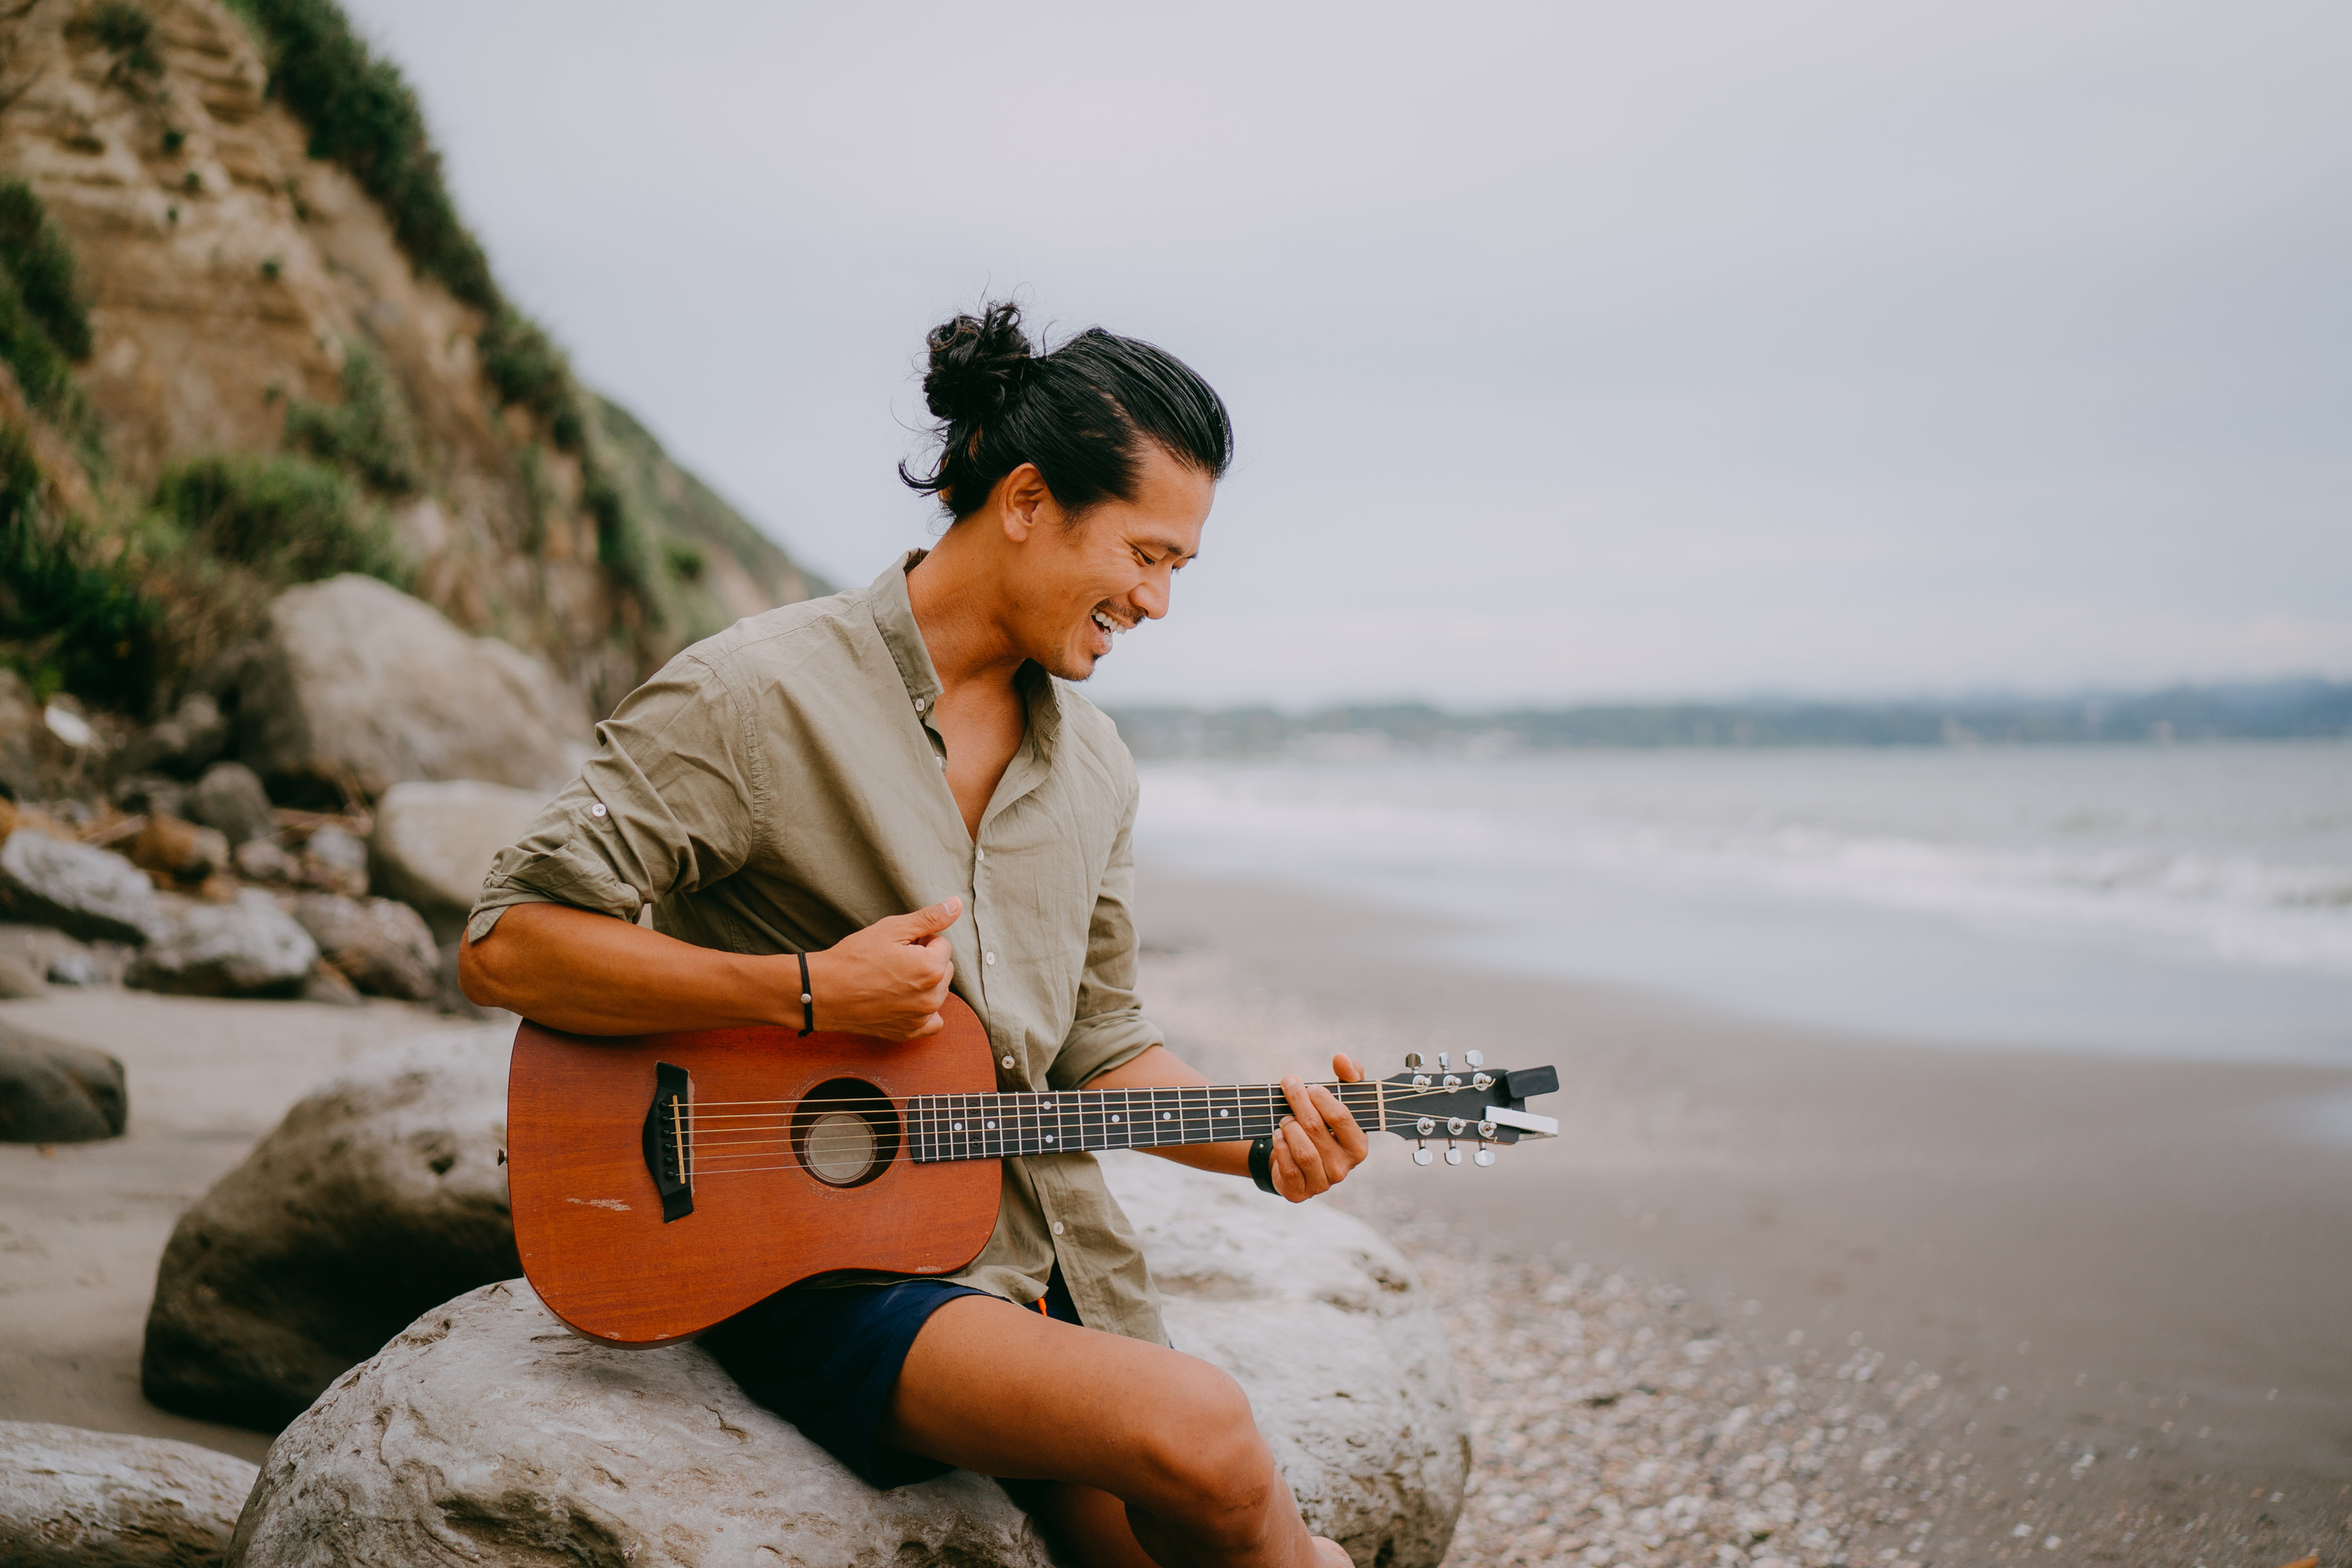 A man smiles as he plays guitar on the beach